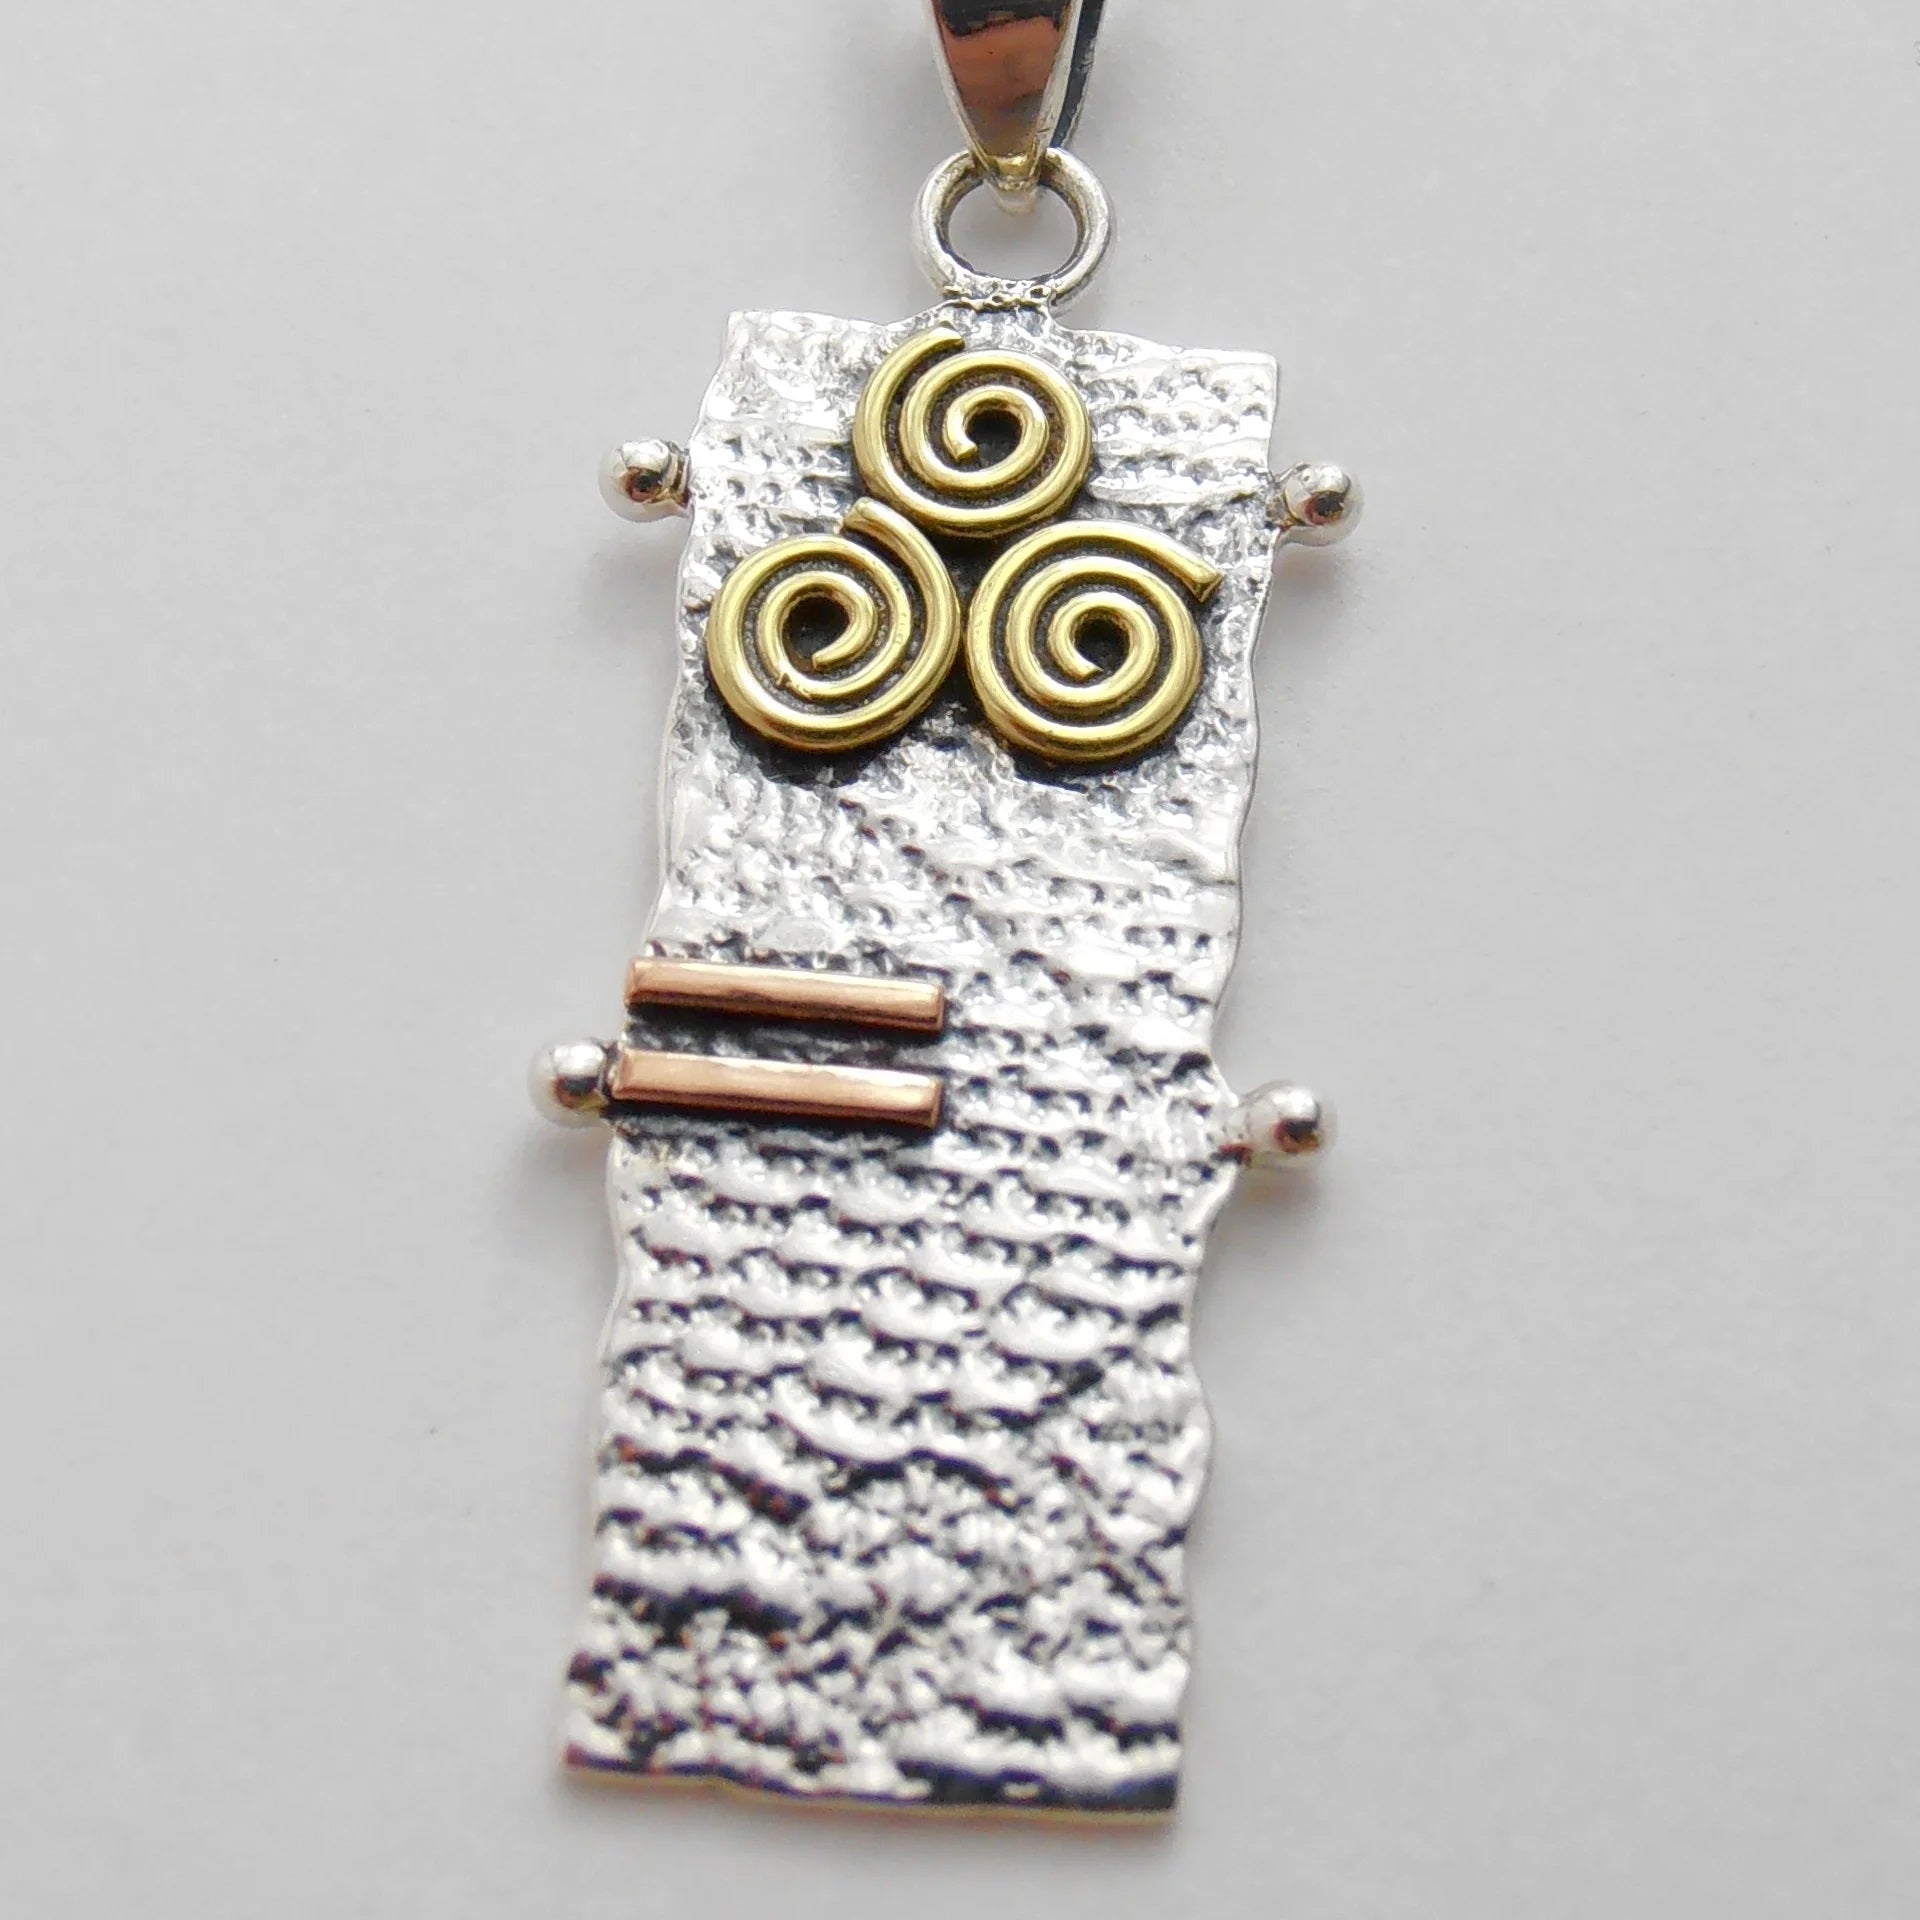 Ogham Pendant - textured lace vertical rectangle shape - sterling silvers - 3 brass spirals at top- 2short  lines  of copper below spirals